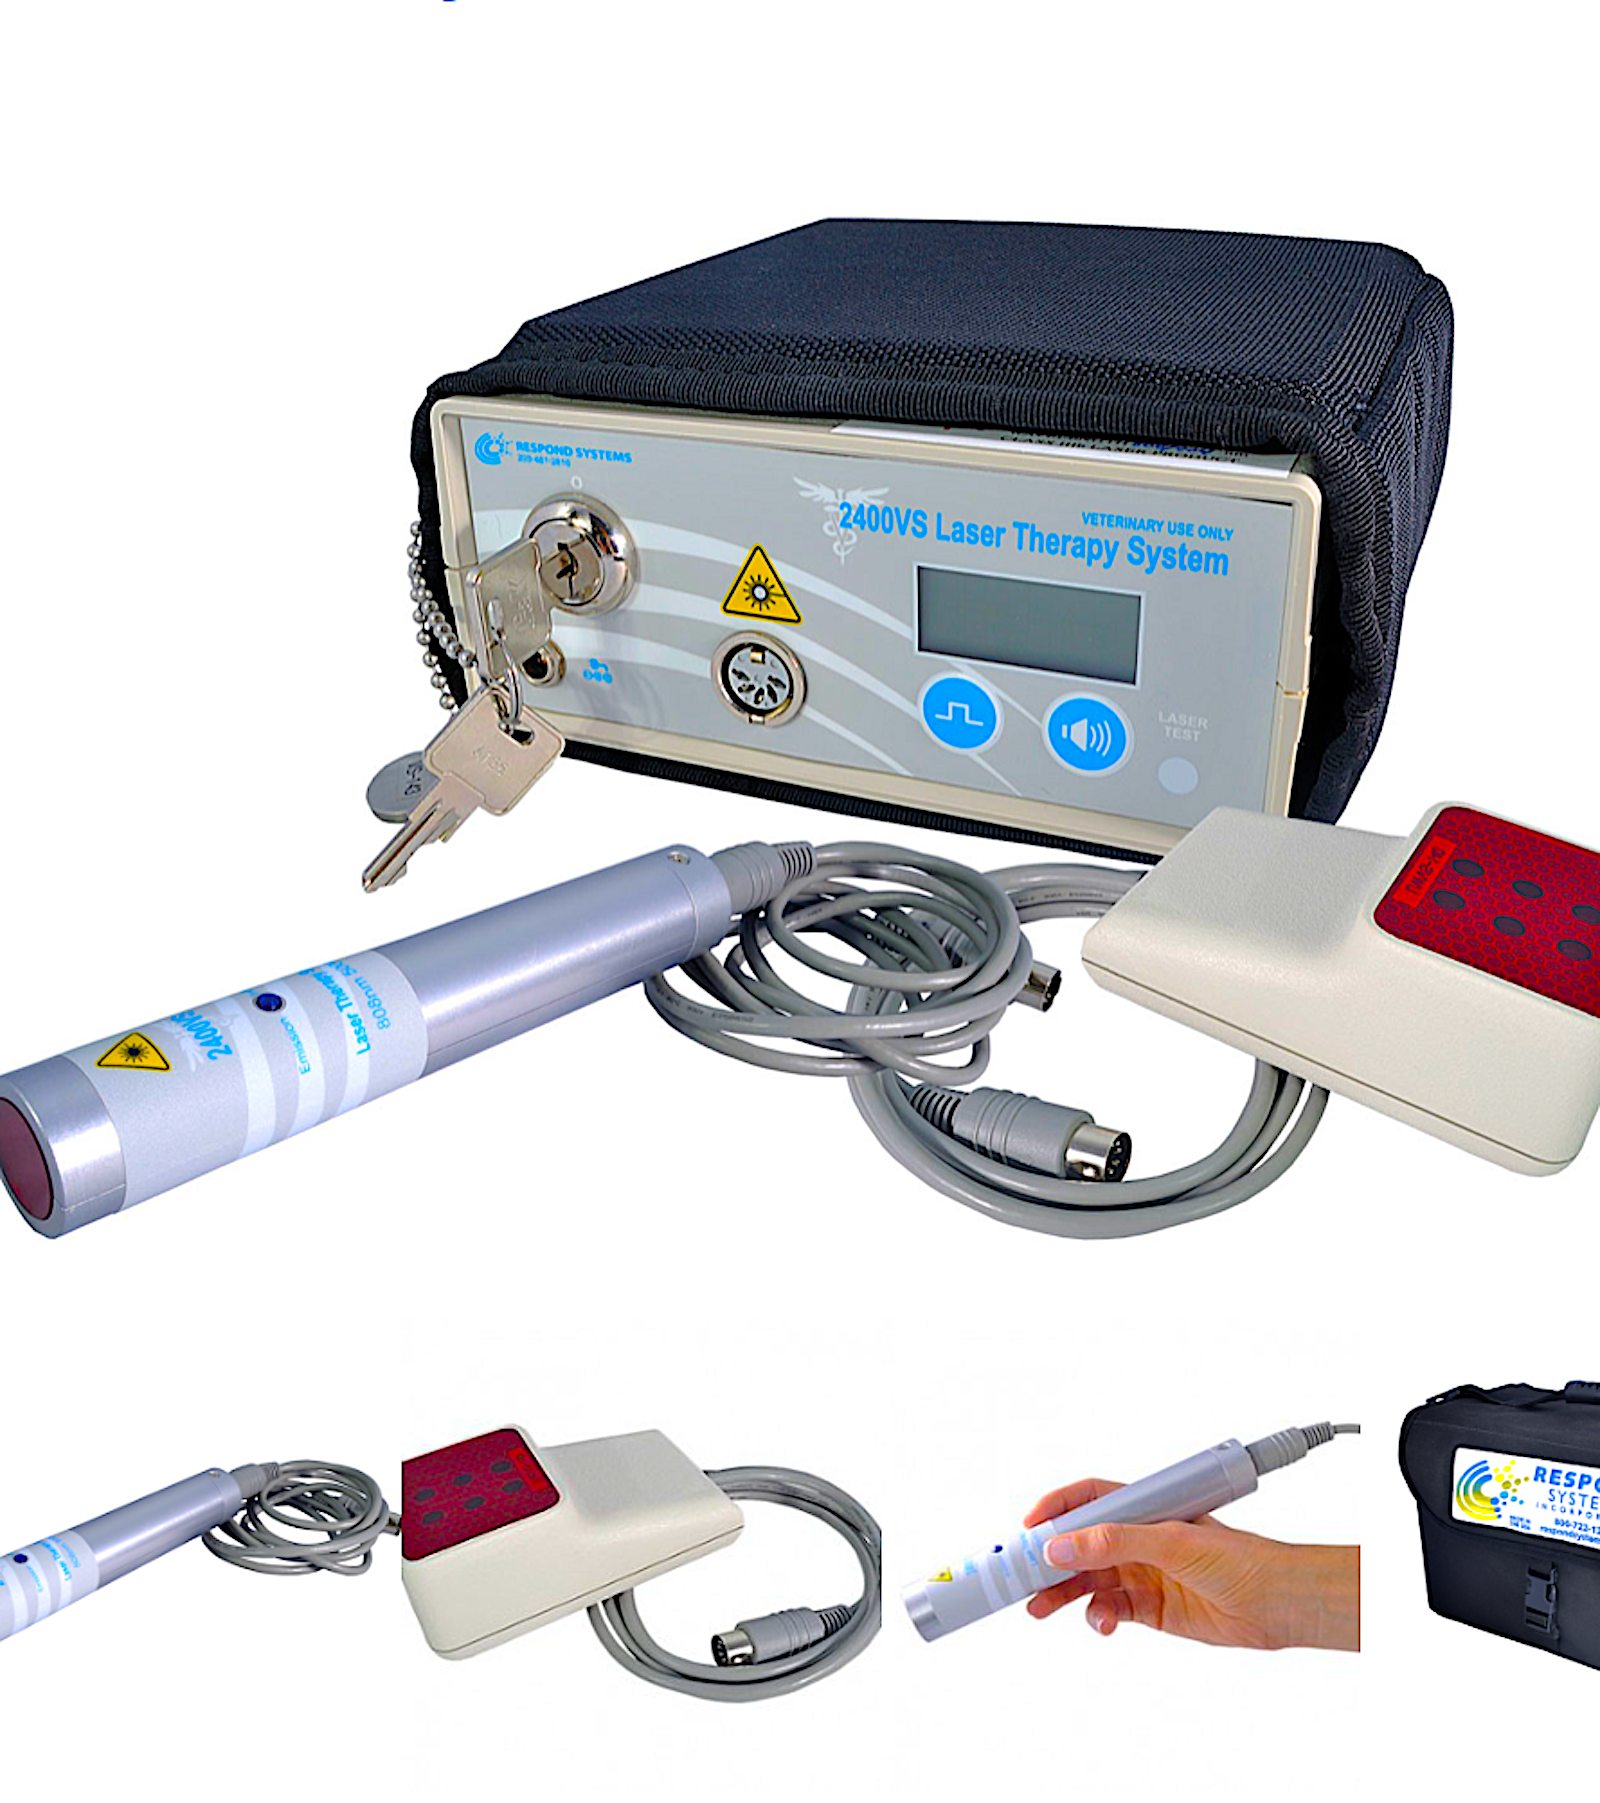 RESPOND SYSTEMS LASERS: 30 years experience in developing veterinary lasers - Vital Vet